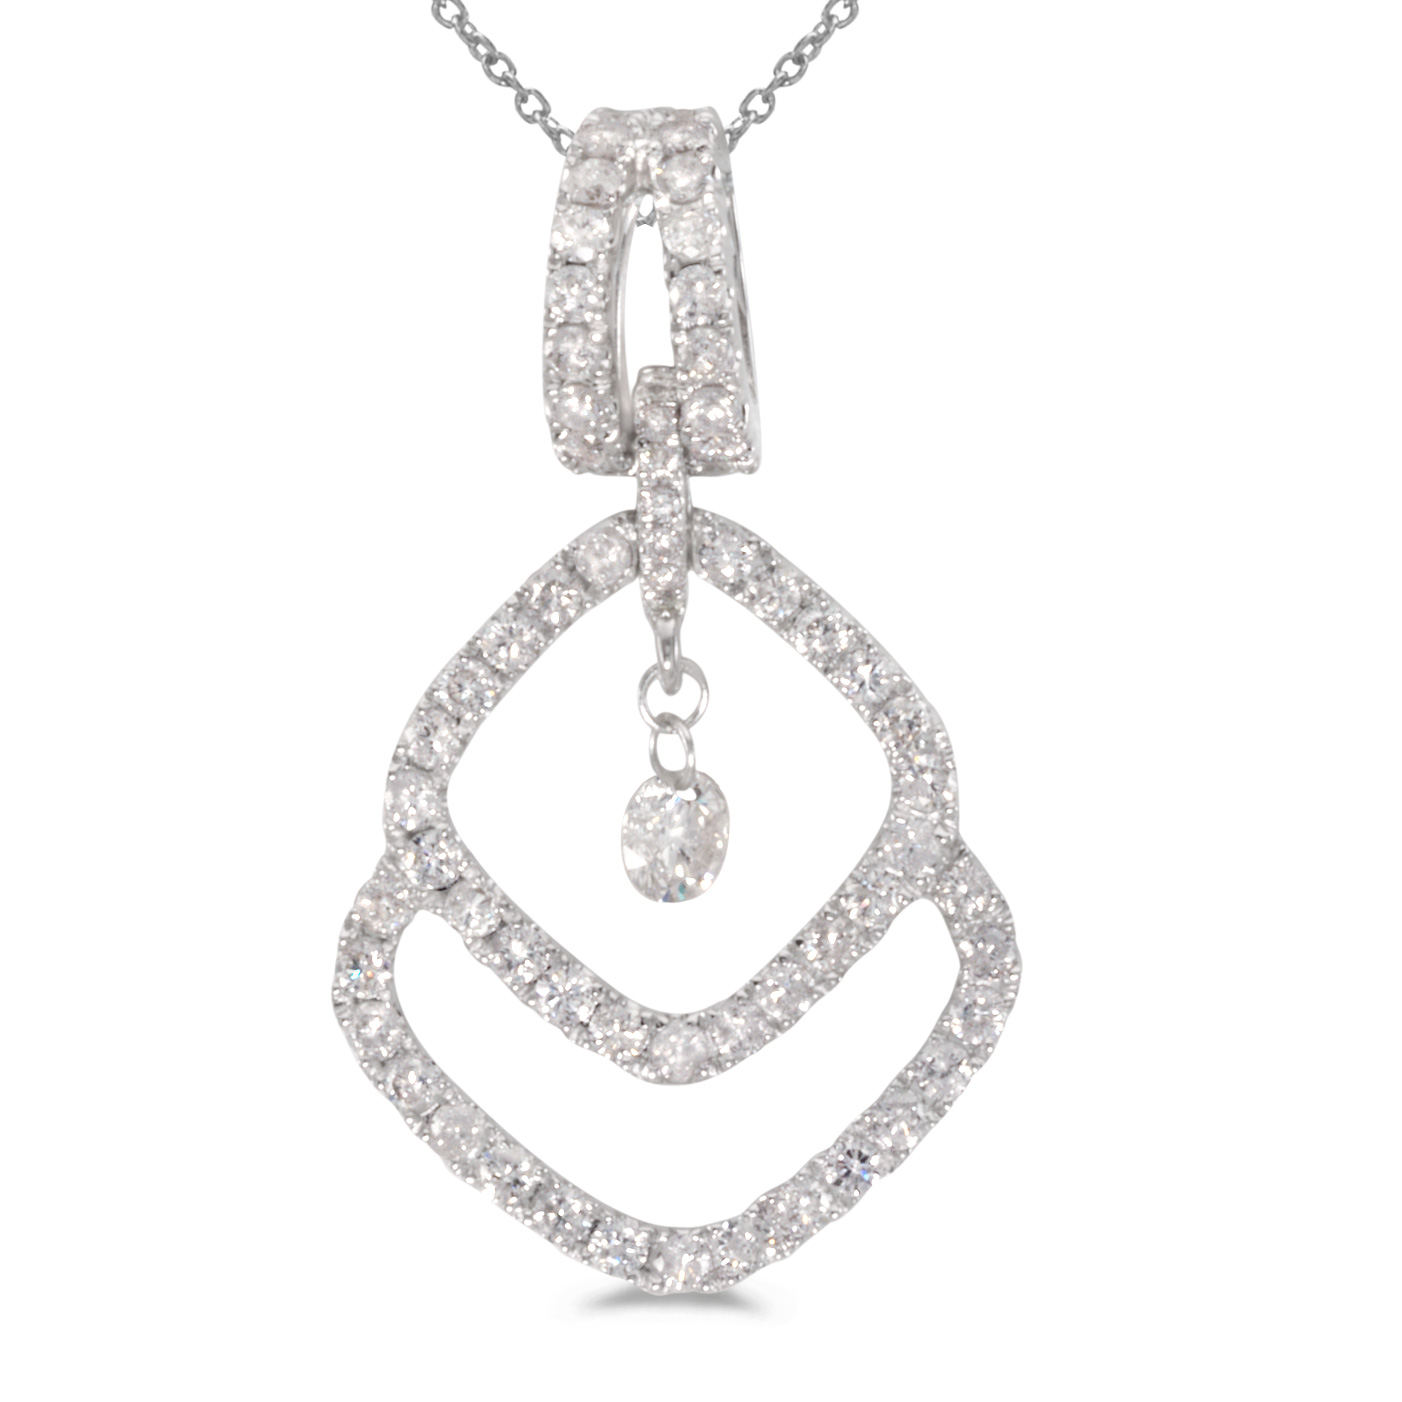 JCX2887: 14k gold Dashinng Diamonds pendant with 0.58 total ct diamonds. The center dangling diamond dances and shimmers with every heartbeat.